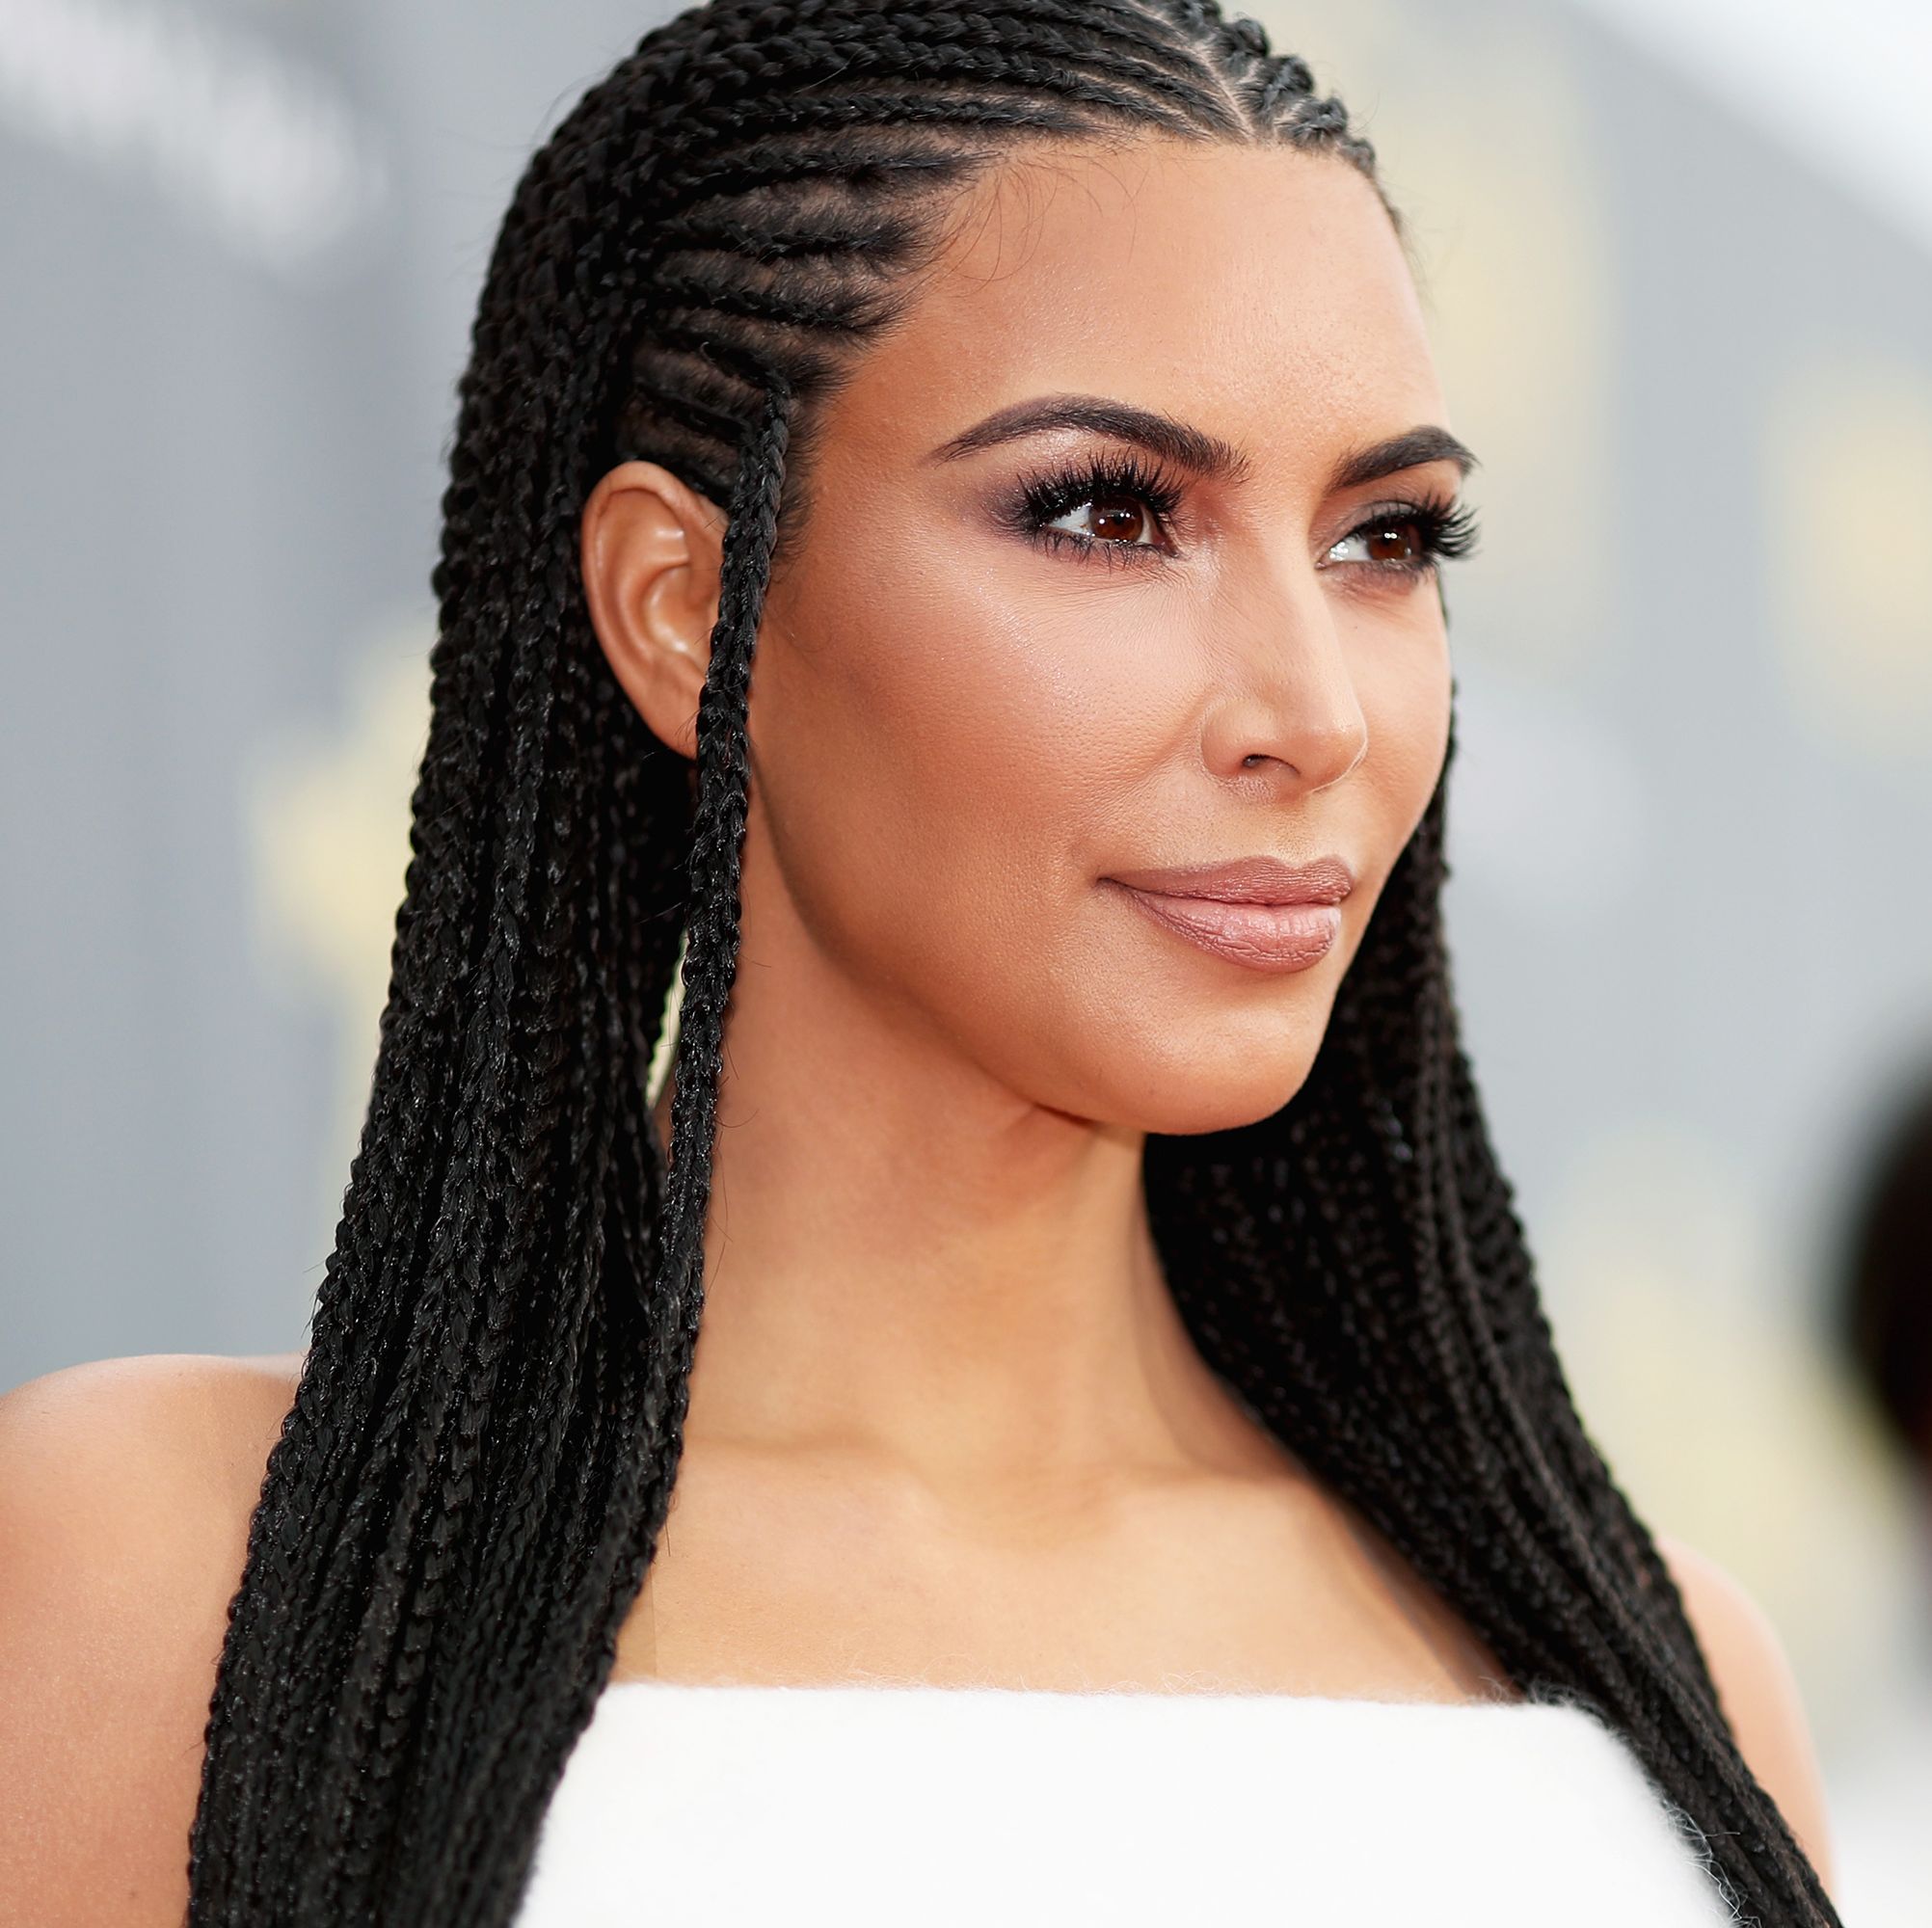 Kim Kardashian accused of cultural appropriation again after wearing braids   The Independent  The Independent